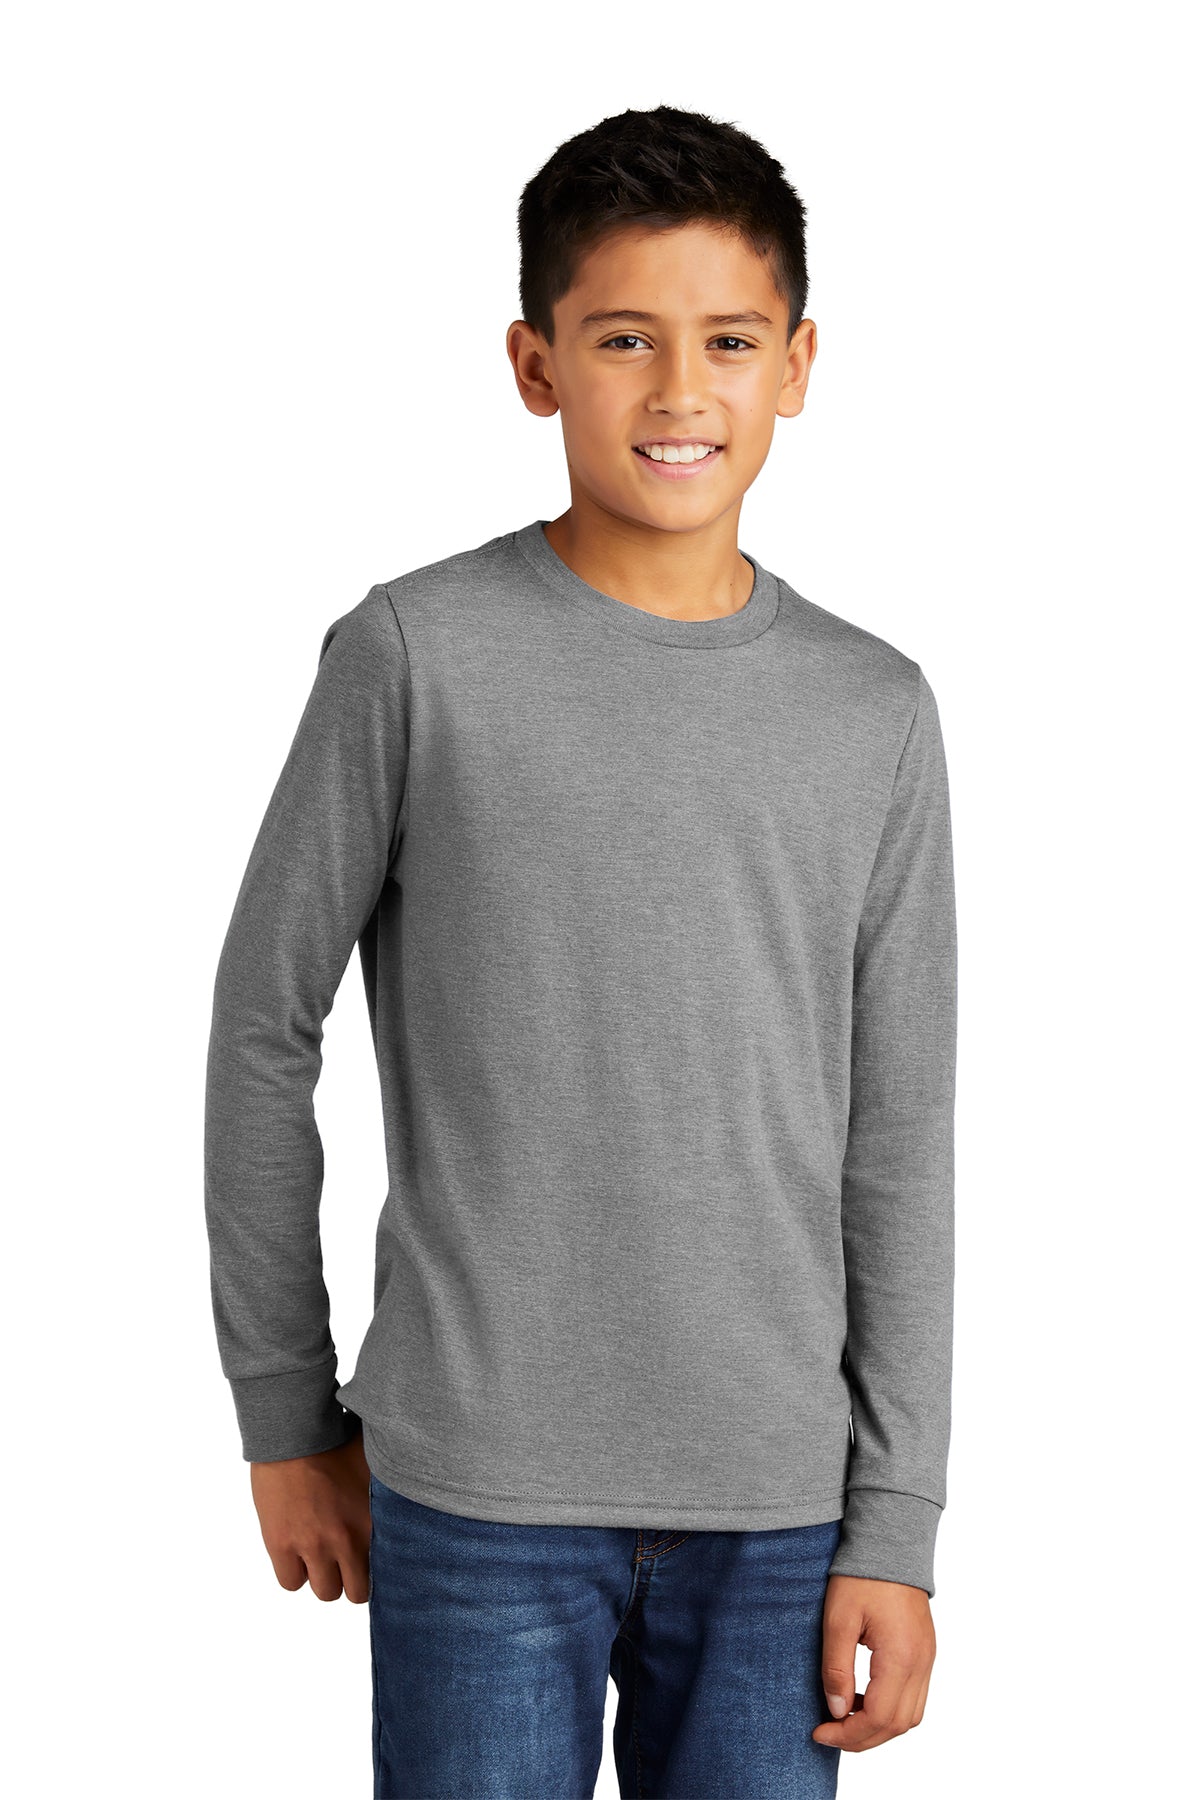 DT132Y District® Youth Perfect Tri® Long Sleeve Tee